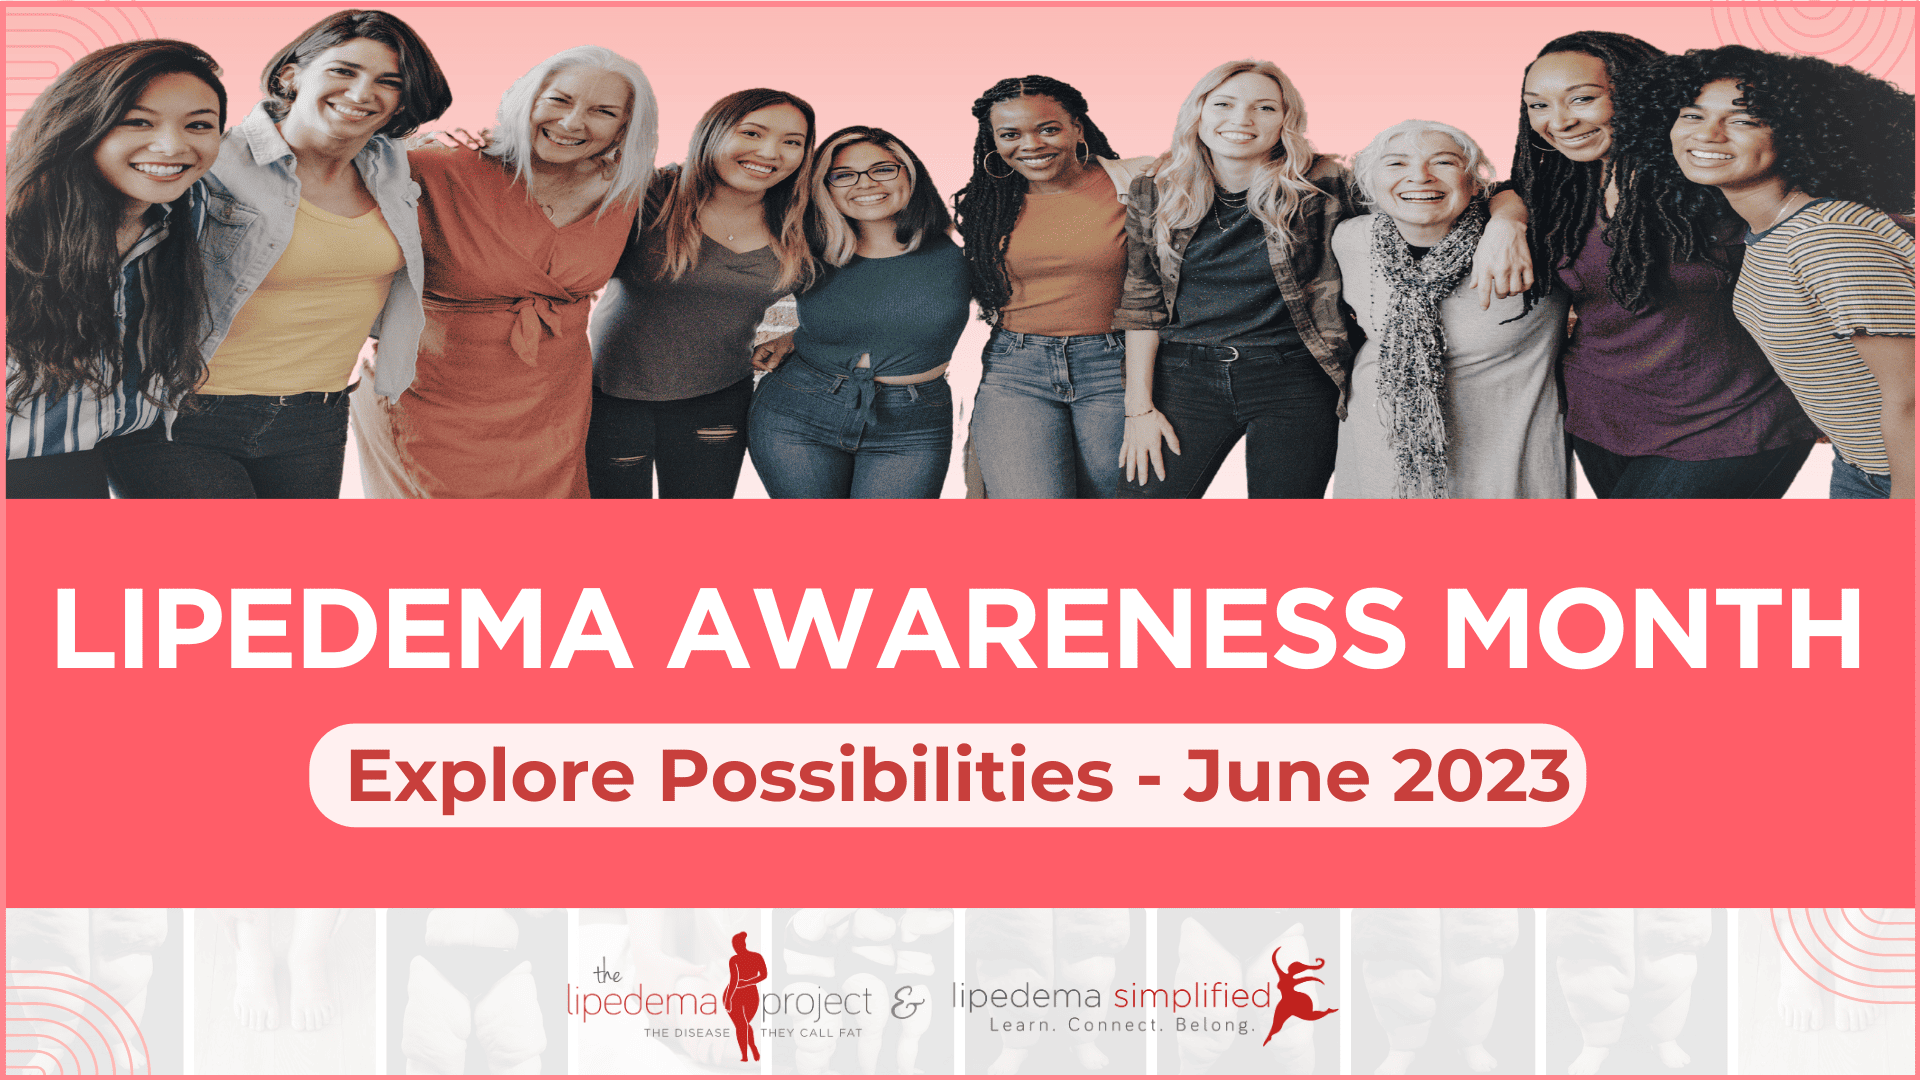 Lipedema Awareness Month June 2023 by Lipedema Simplified and The Lipedema Project